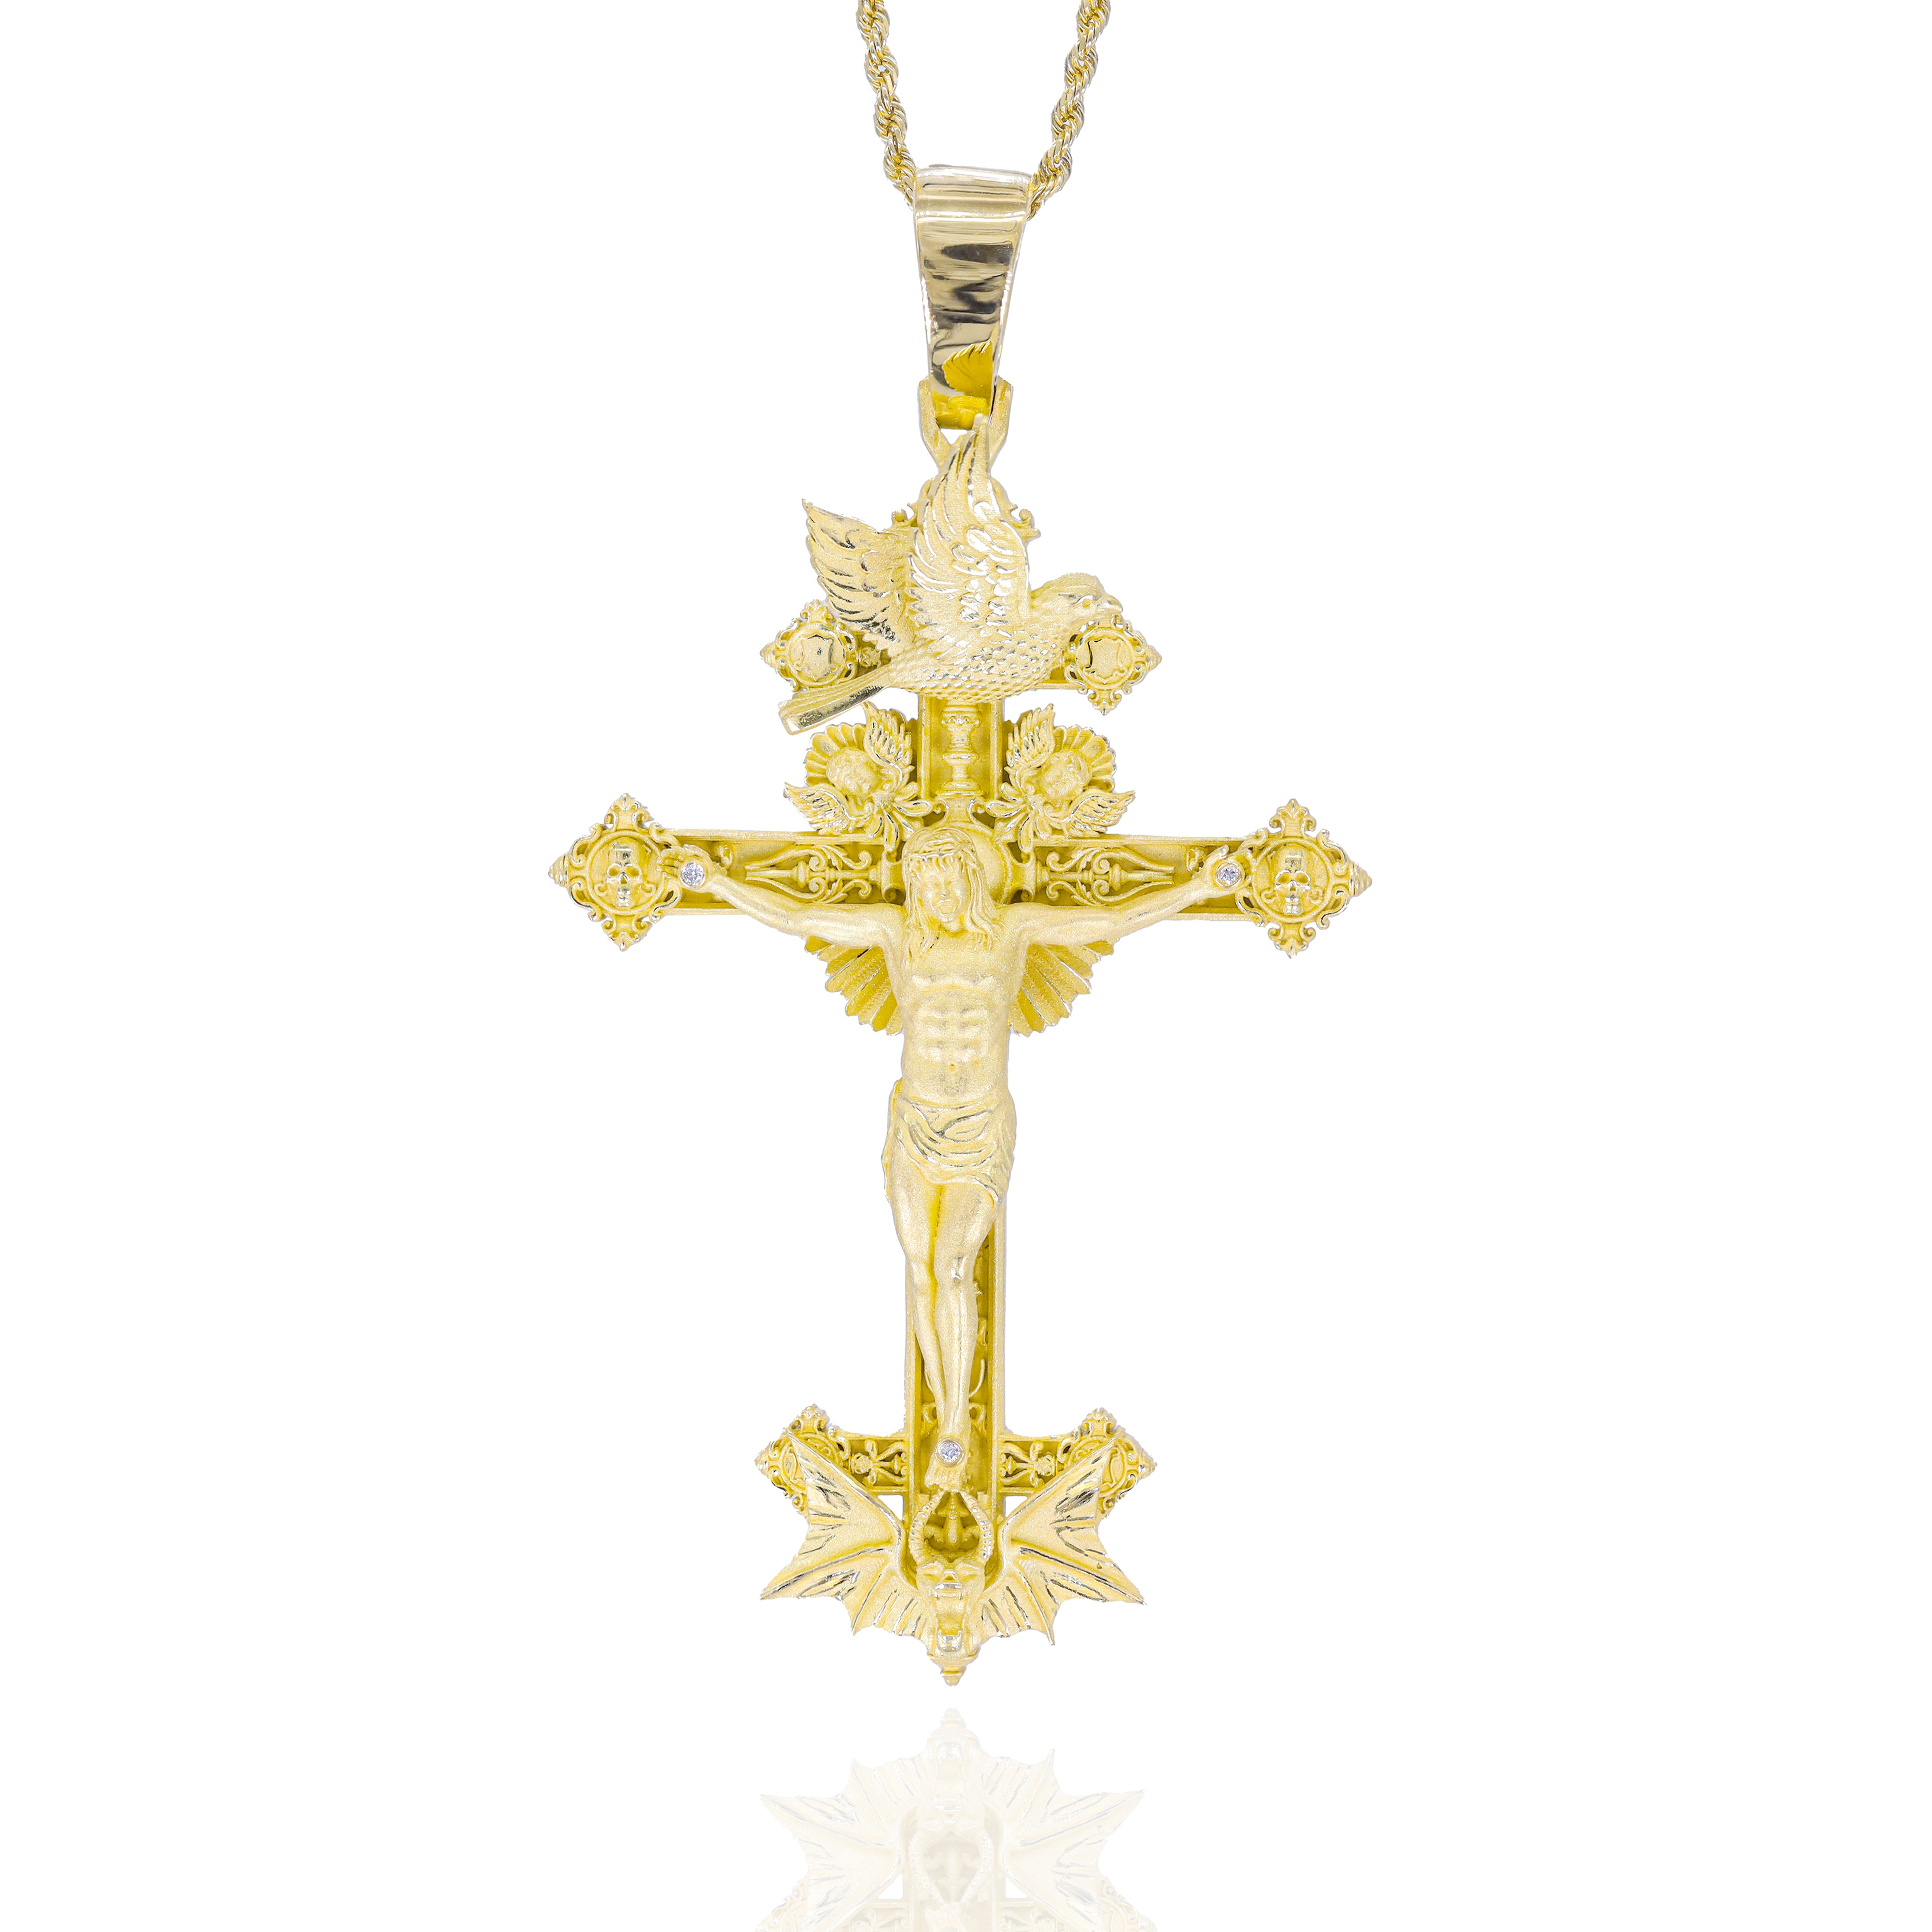 Detailed 18KT Gold Satanic Jesus Cross Solid Gold Pendant with Diamond Nails